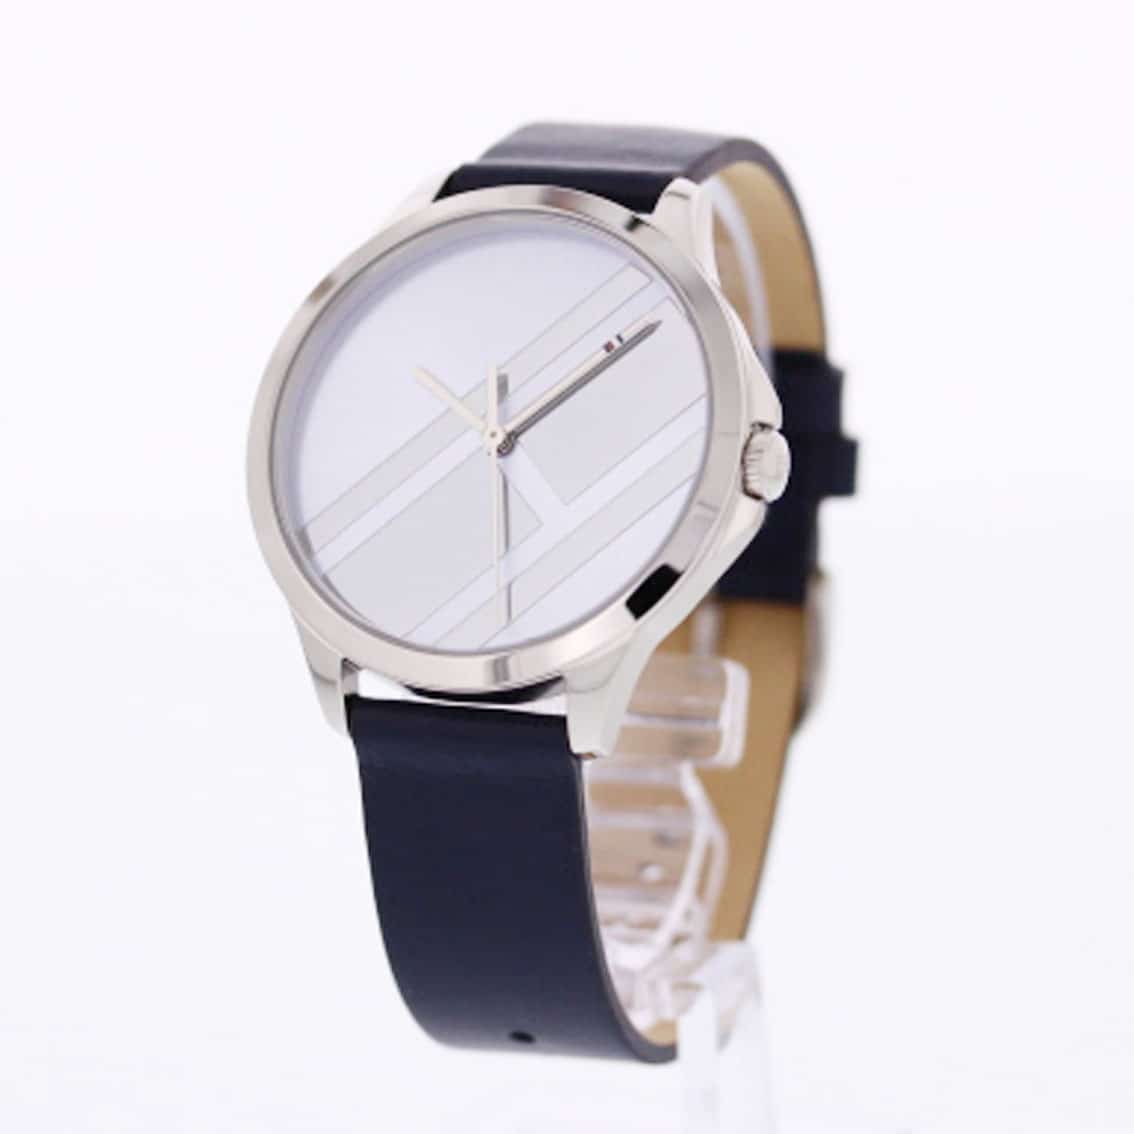 New] TOMMY HILFIGER 1781964 watch unisex Men's Lady's - BE FORWARD Store